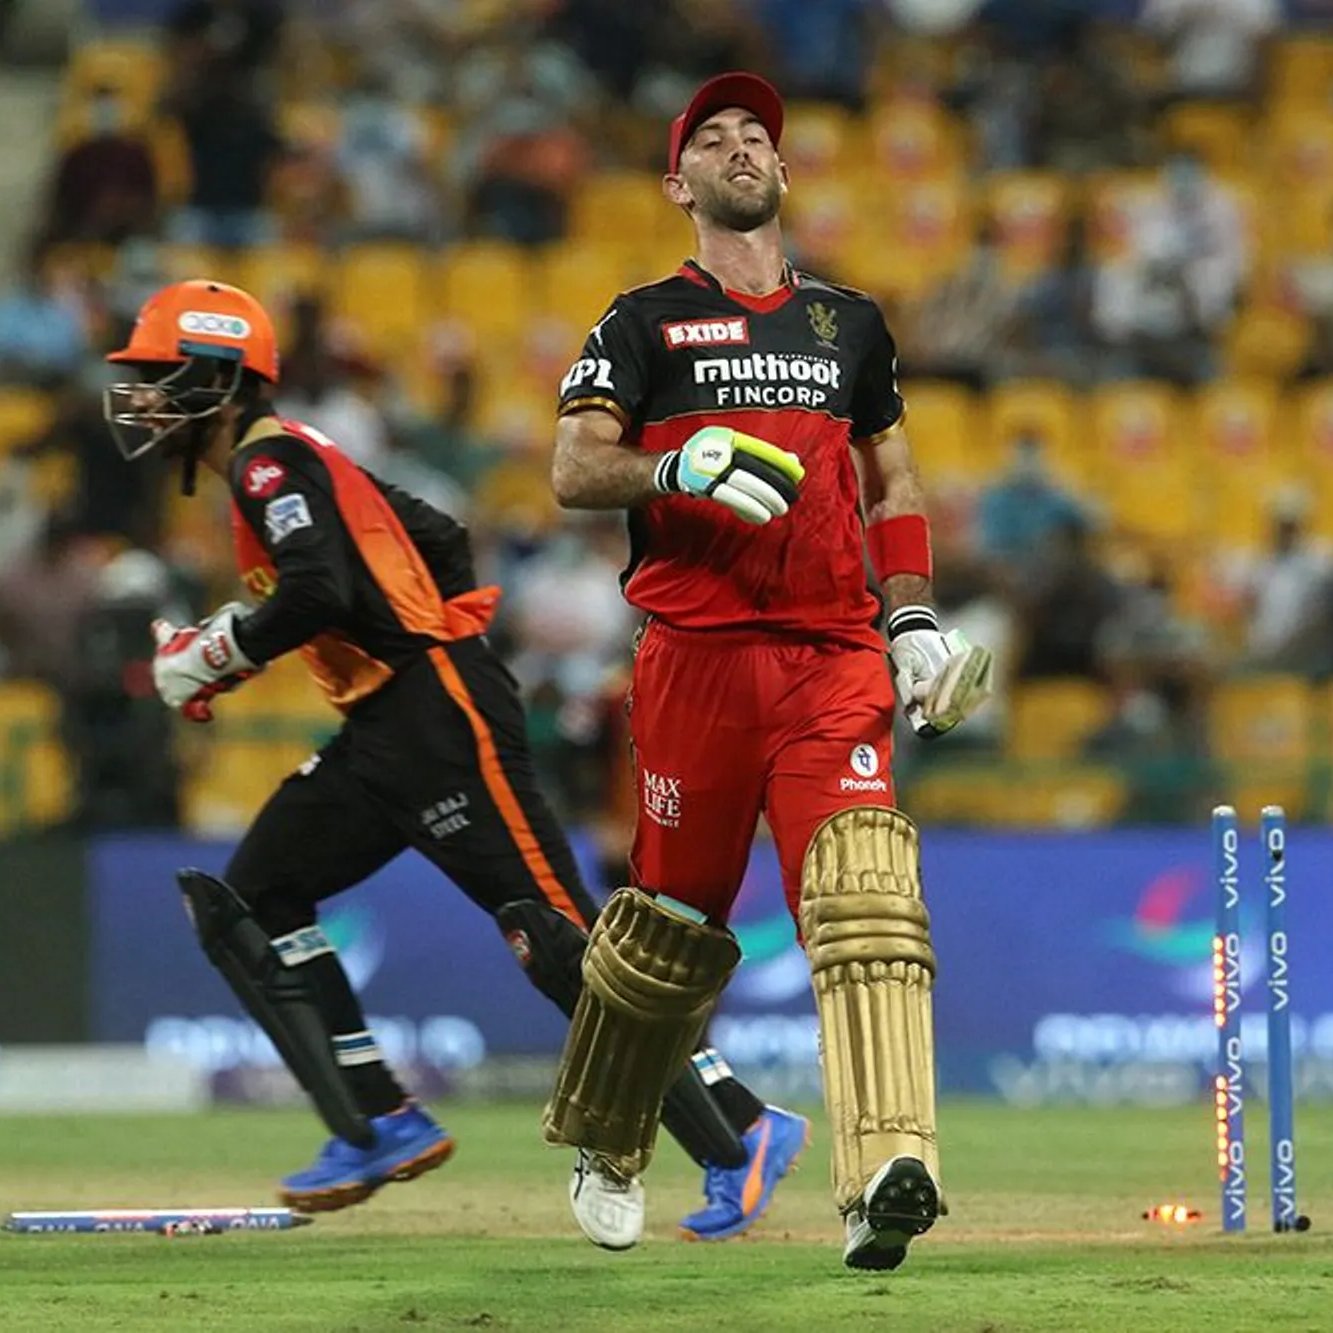 RCB vs SRH | Glenn Maxwell's run-out was the game-changing moment, says Virat Kohli as RCB lose last-over thriller to SRH